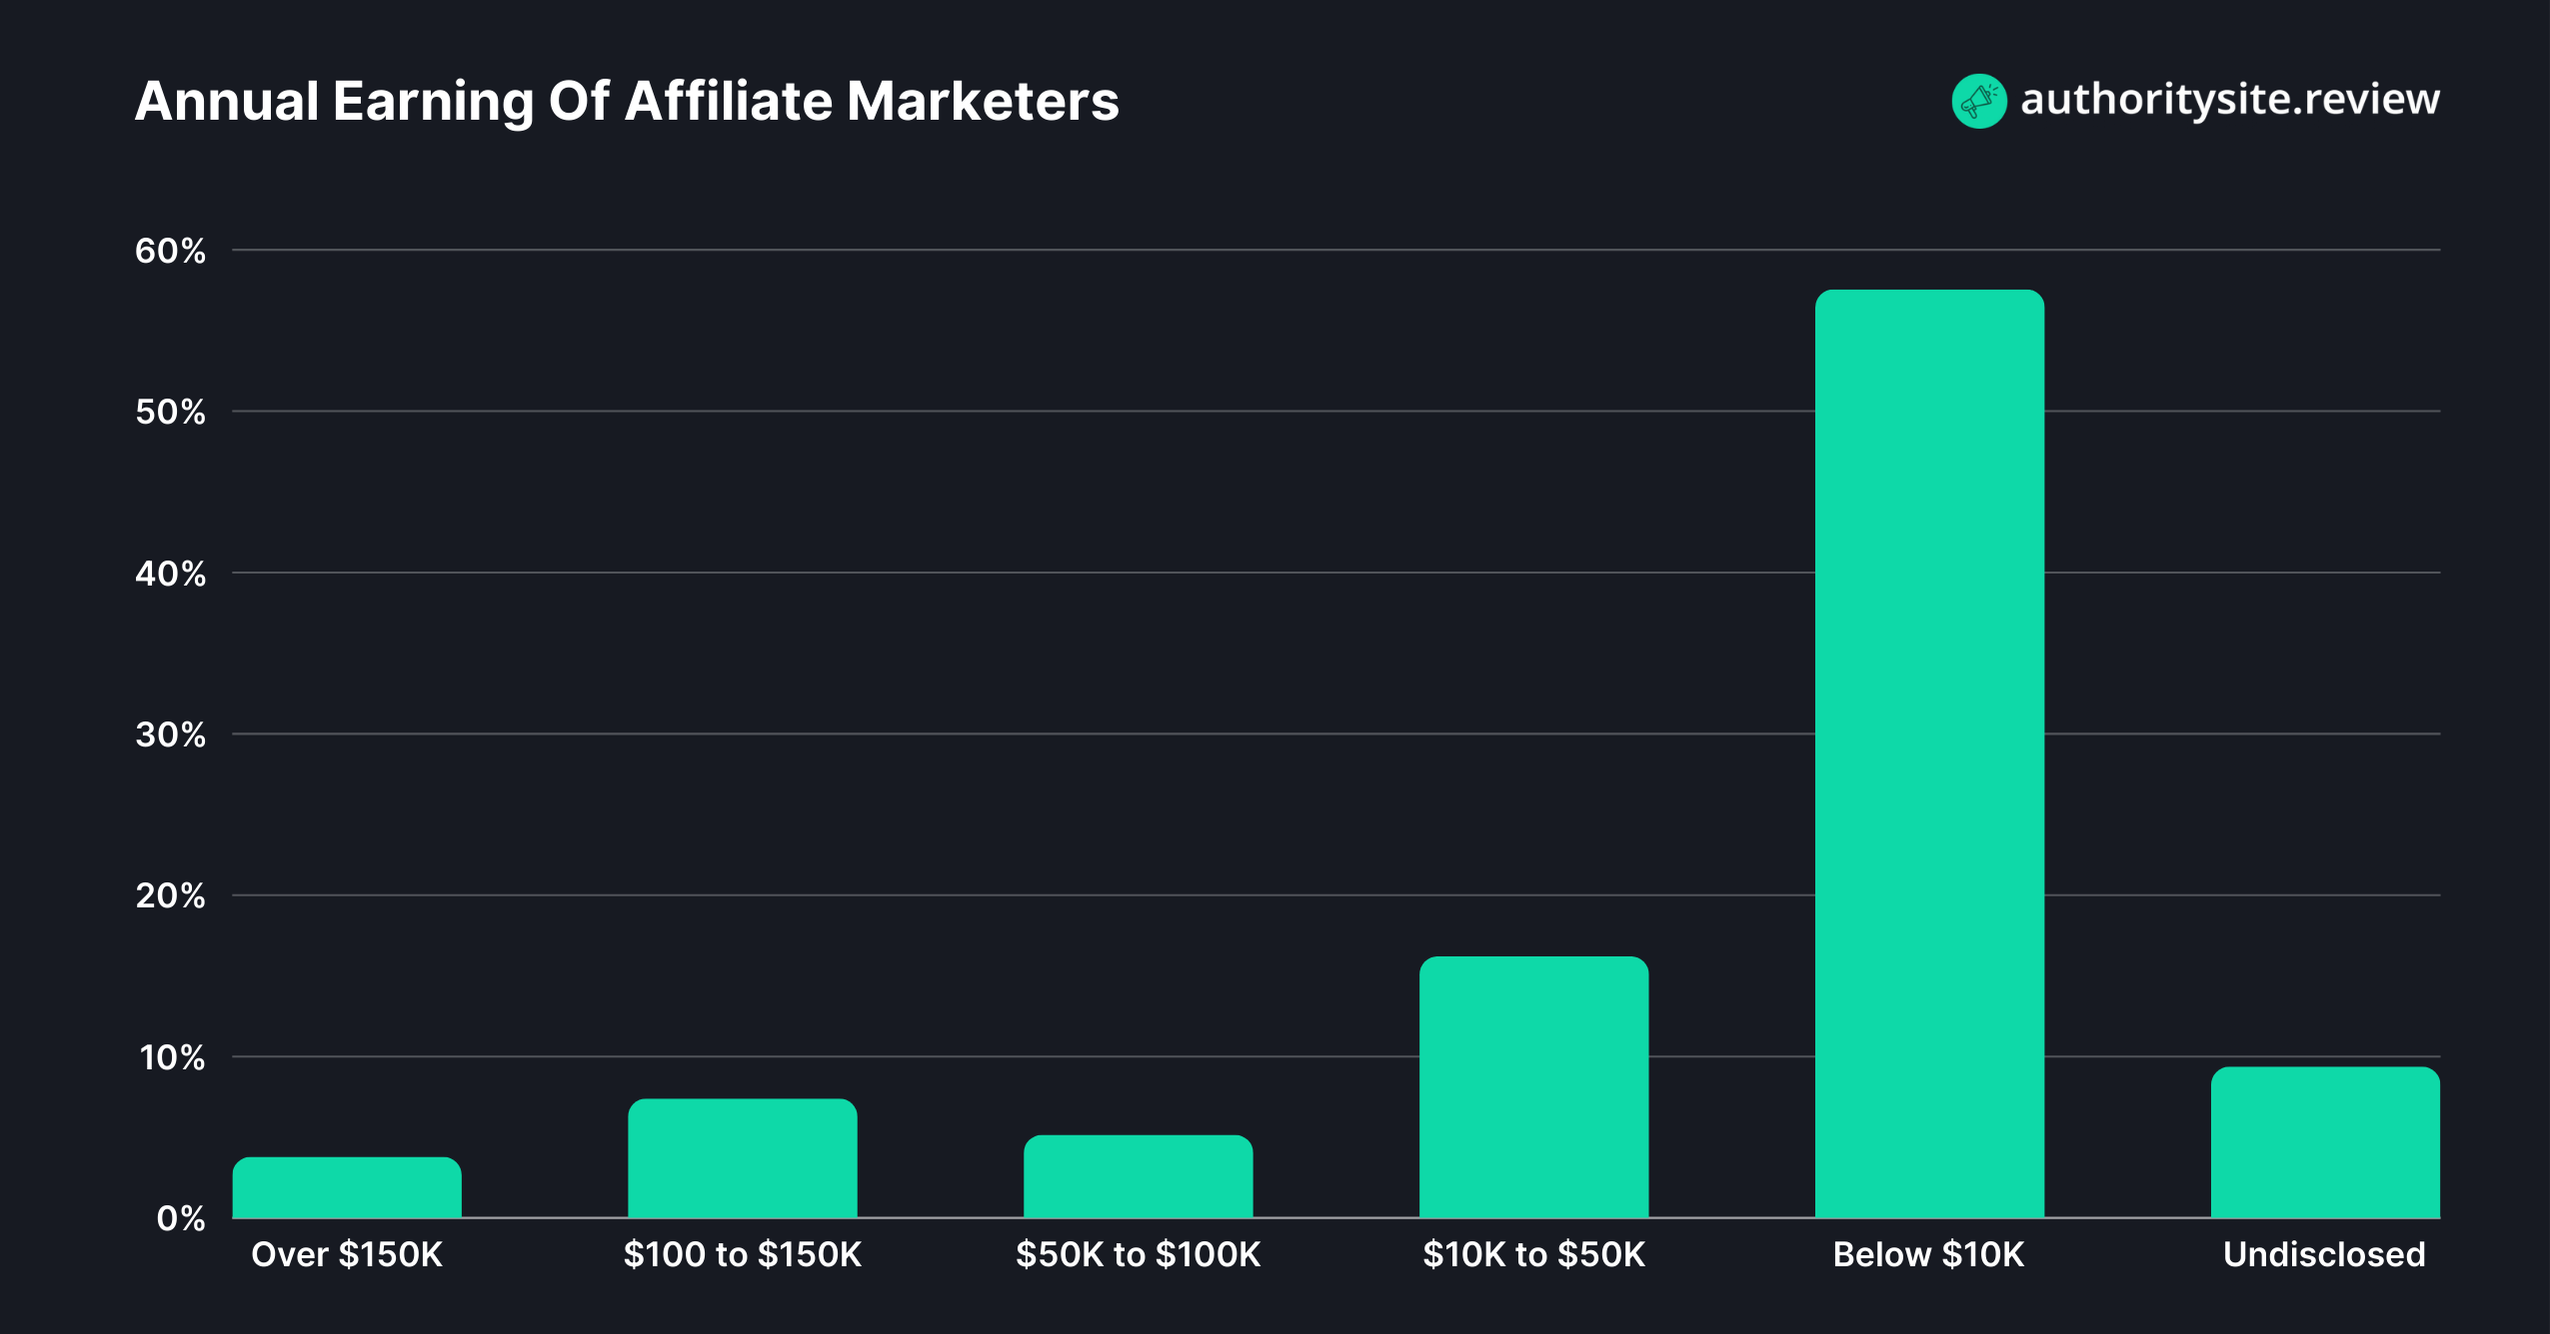 Annual Earning Of Affiliate Marketers